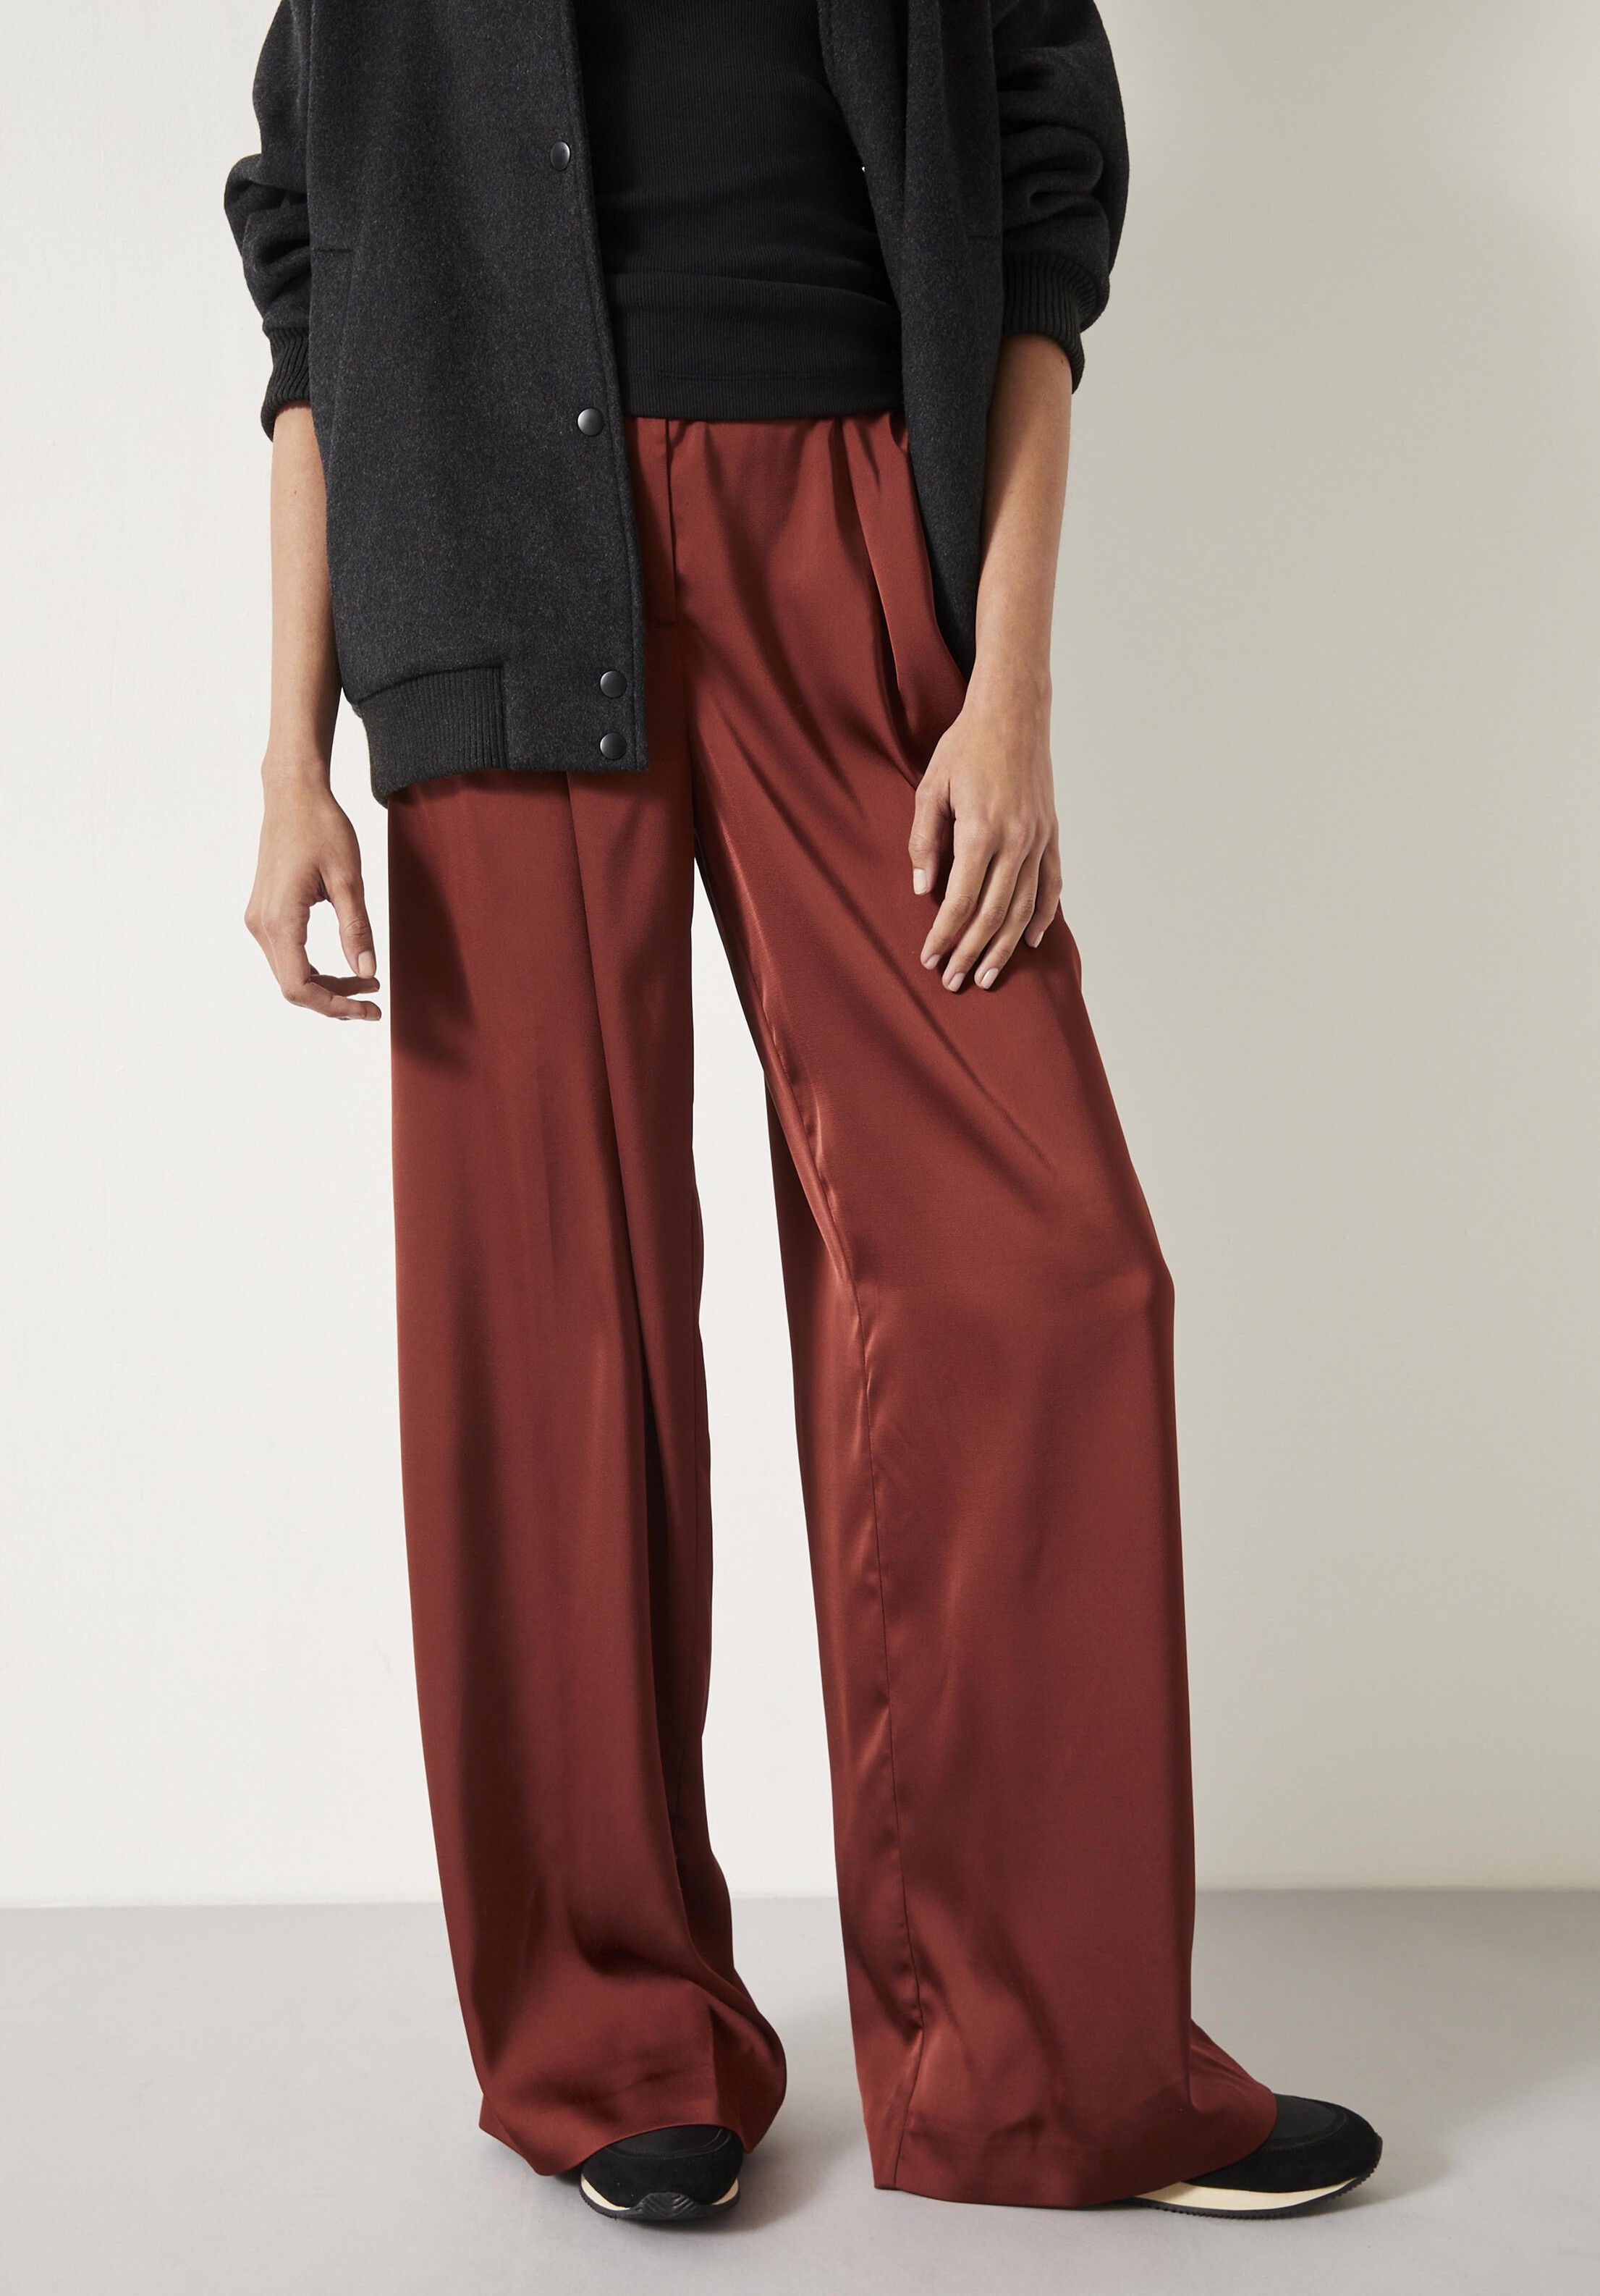 New Look's £30 autumn trousers are an 'awesome fit for an hourglass figure'  - OK! Magazine